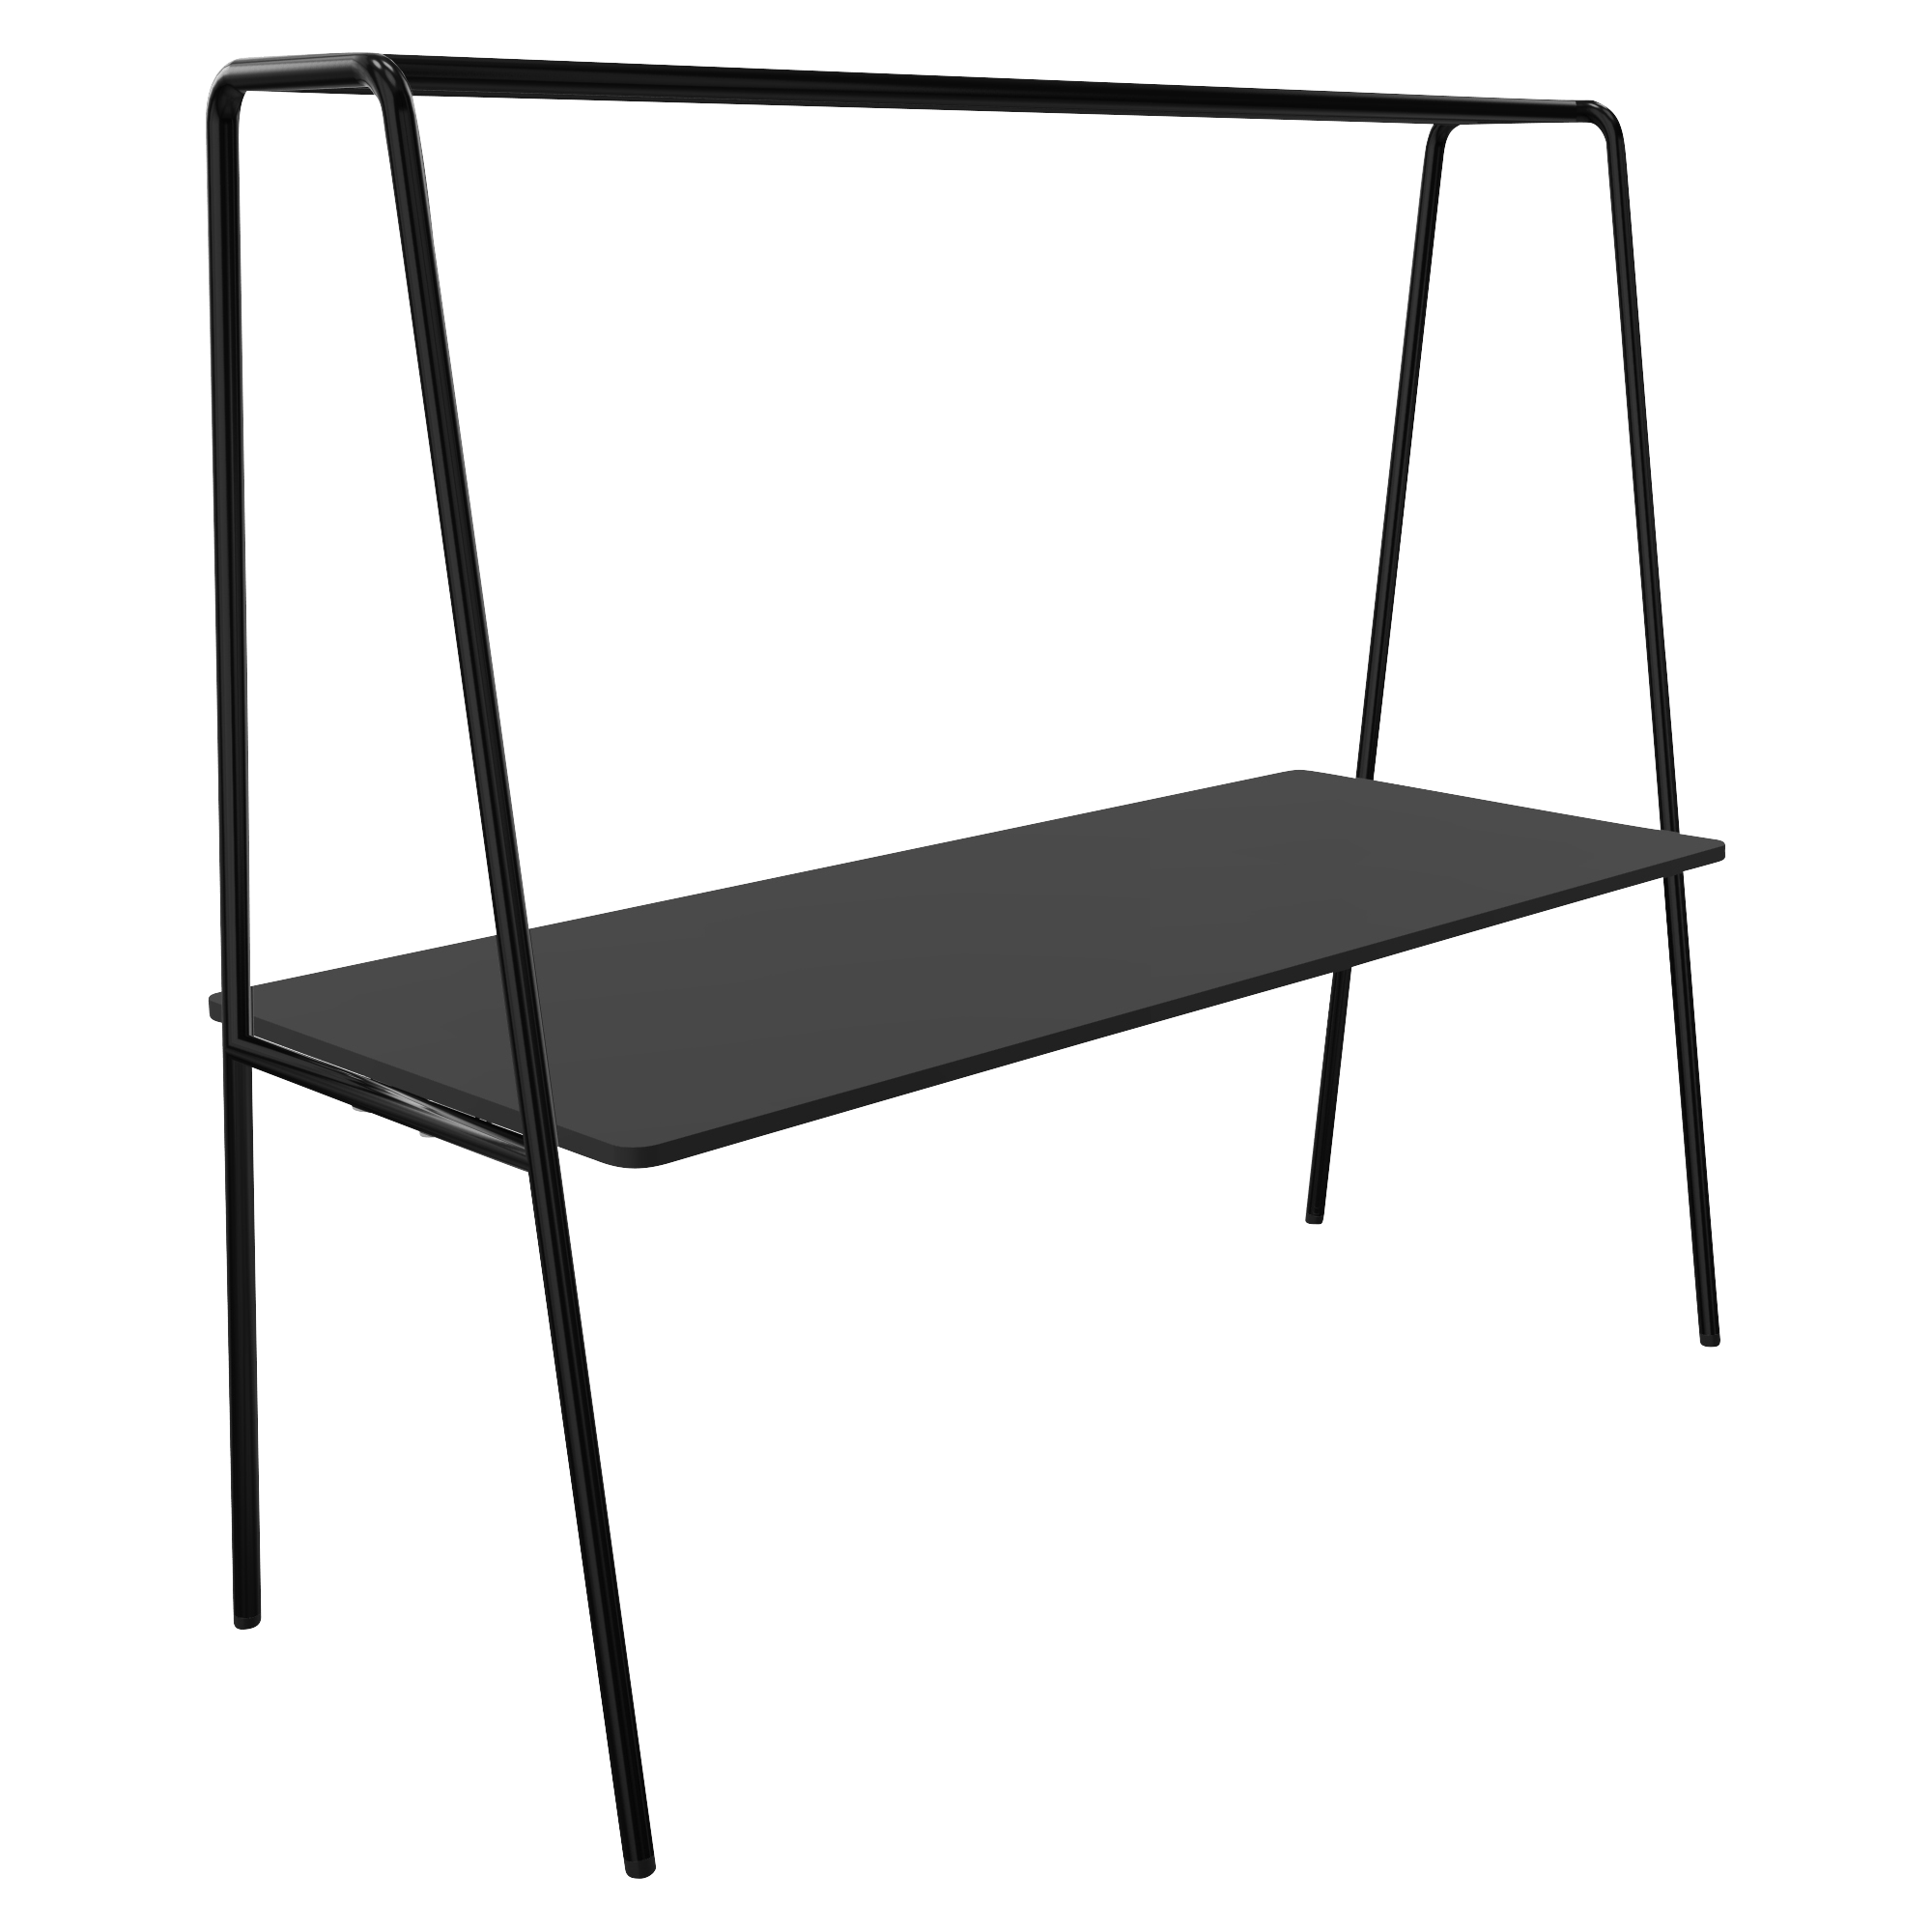 Black community table with black desk and overhead bar